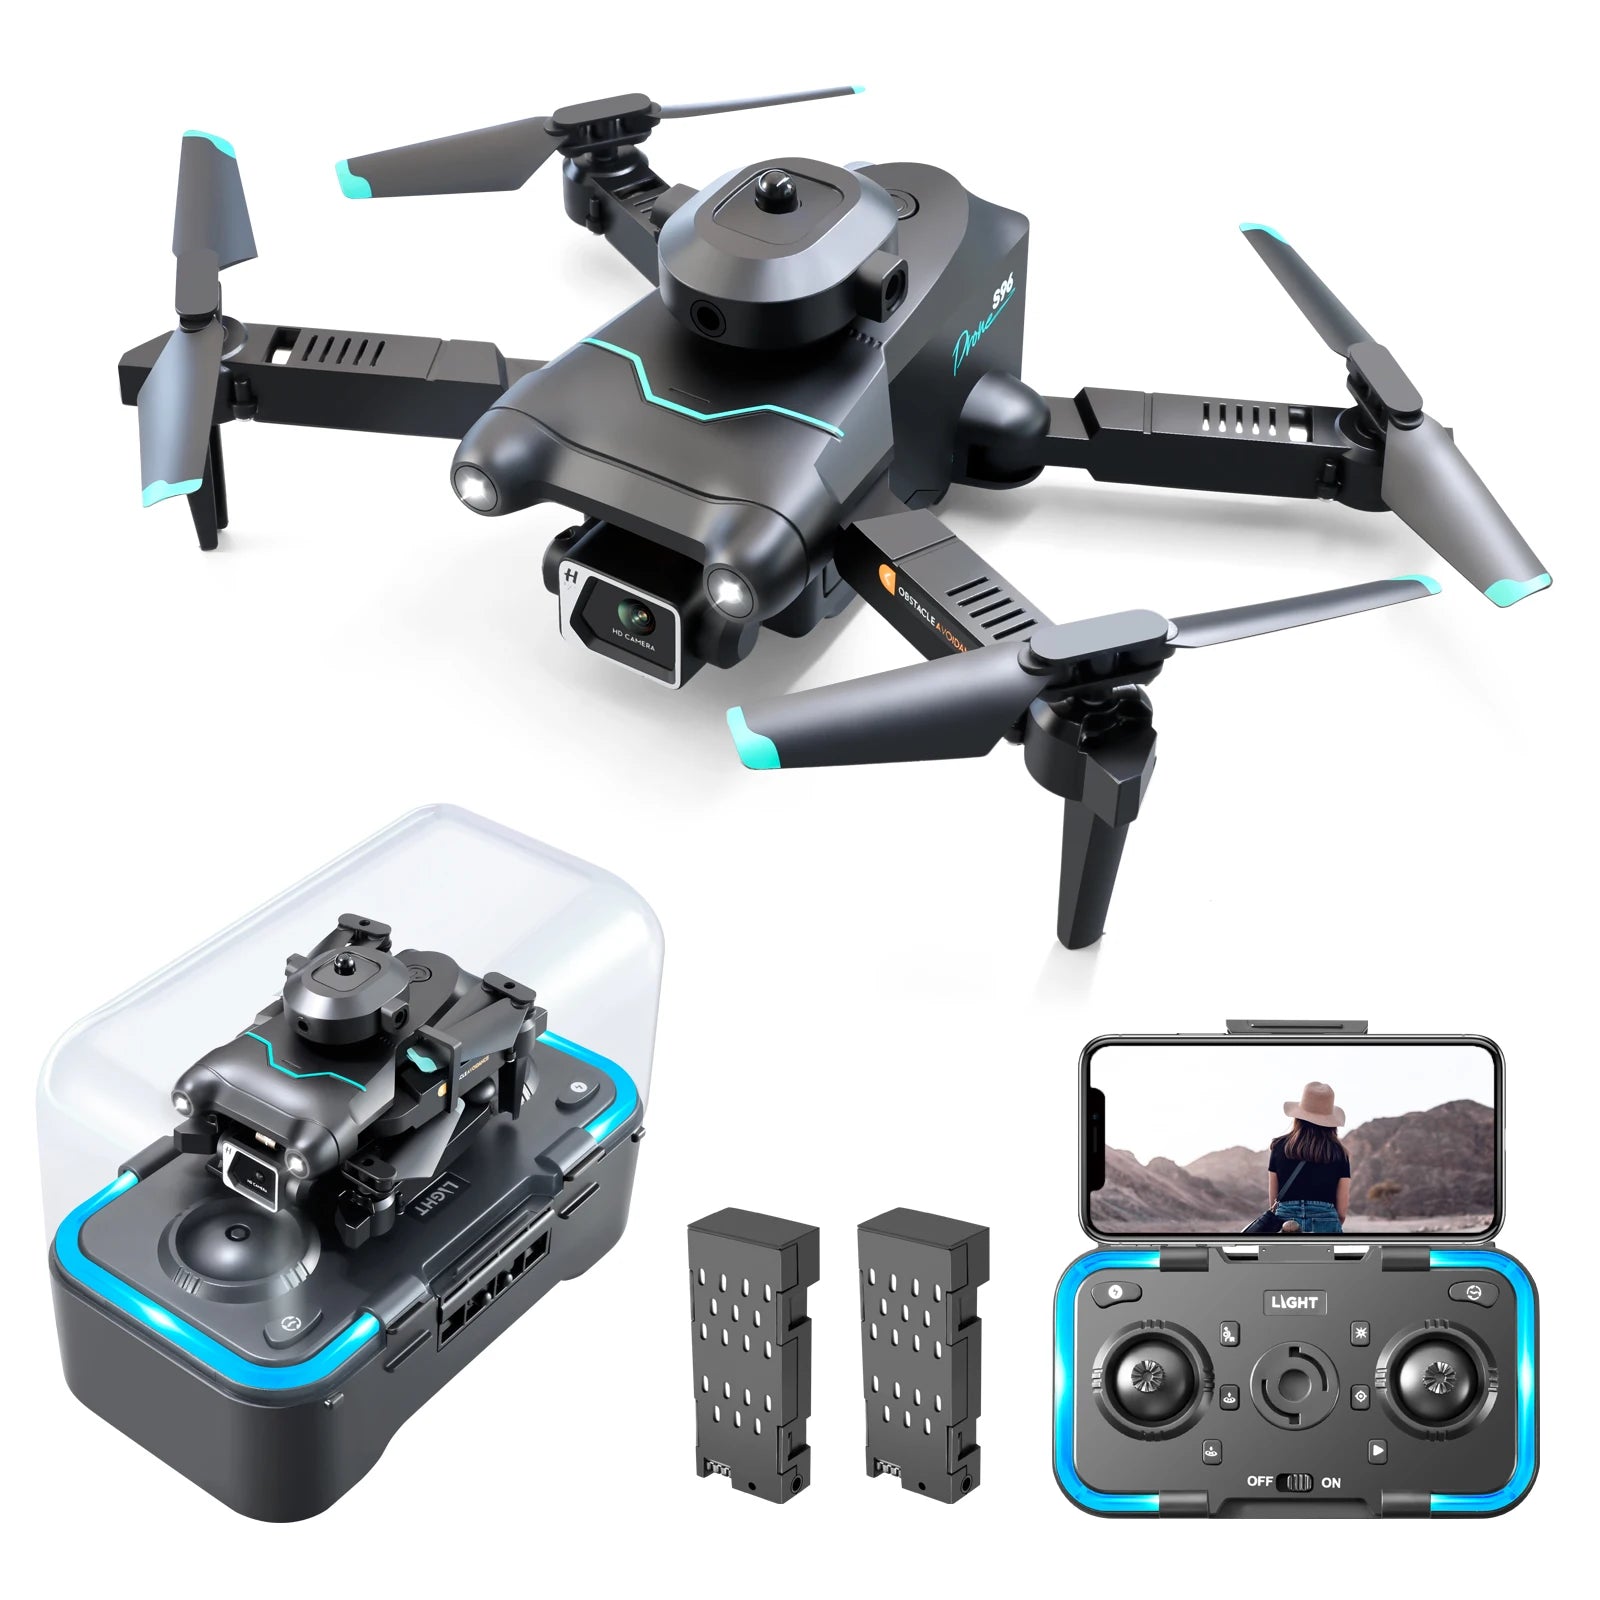 s96 mini drone features : fpv capable features